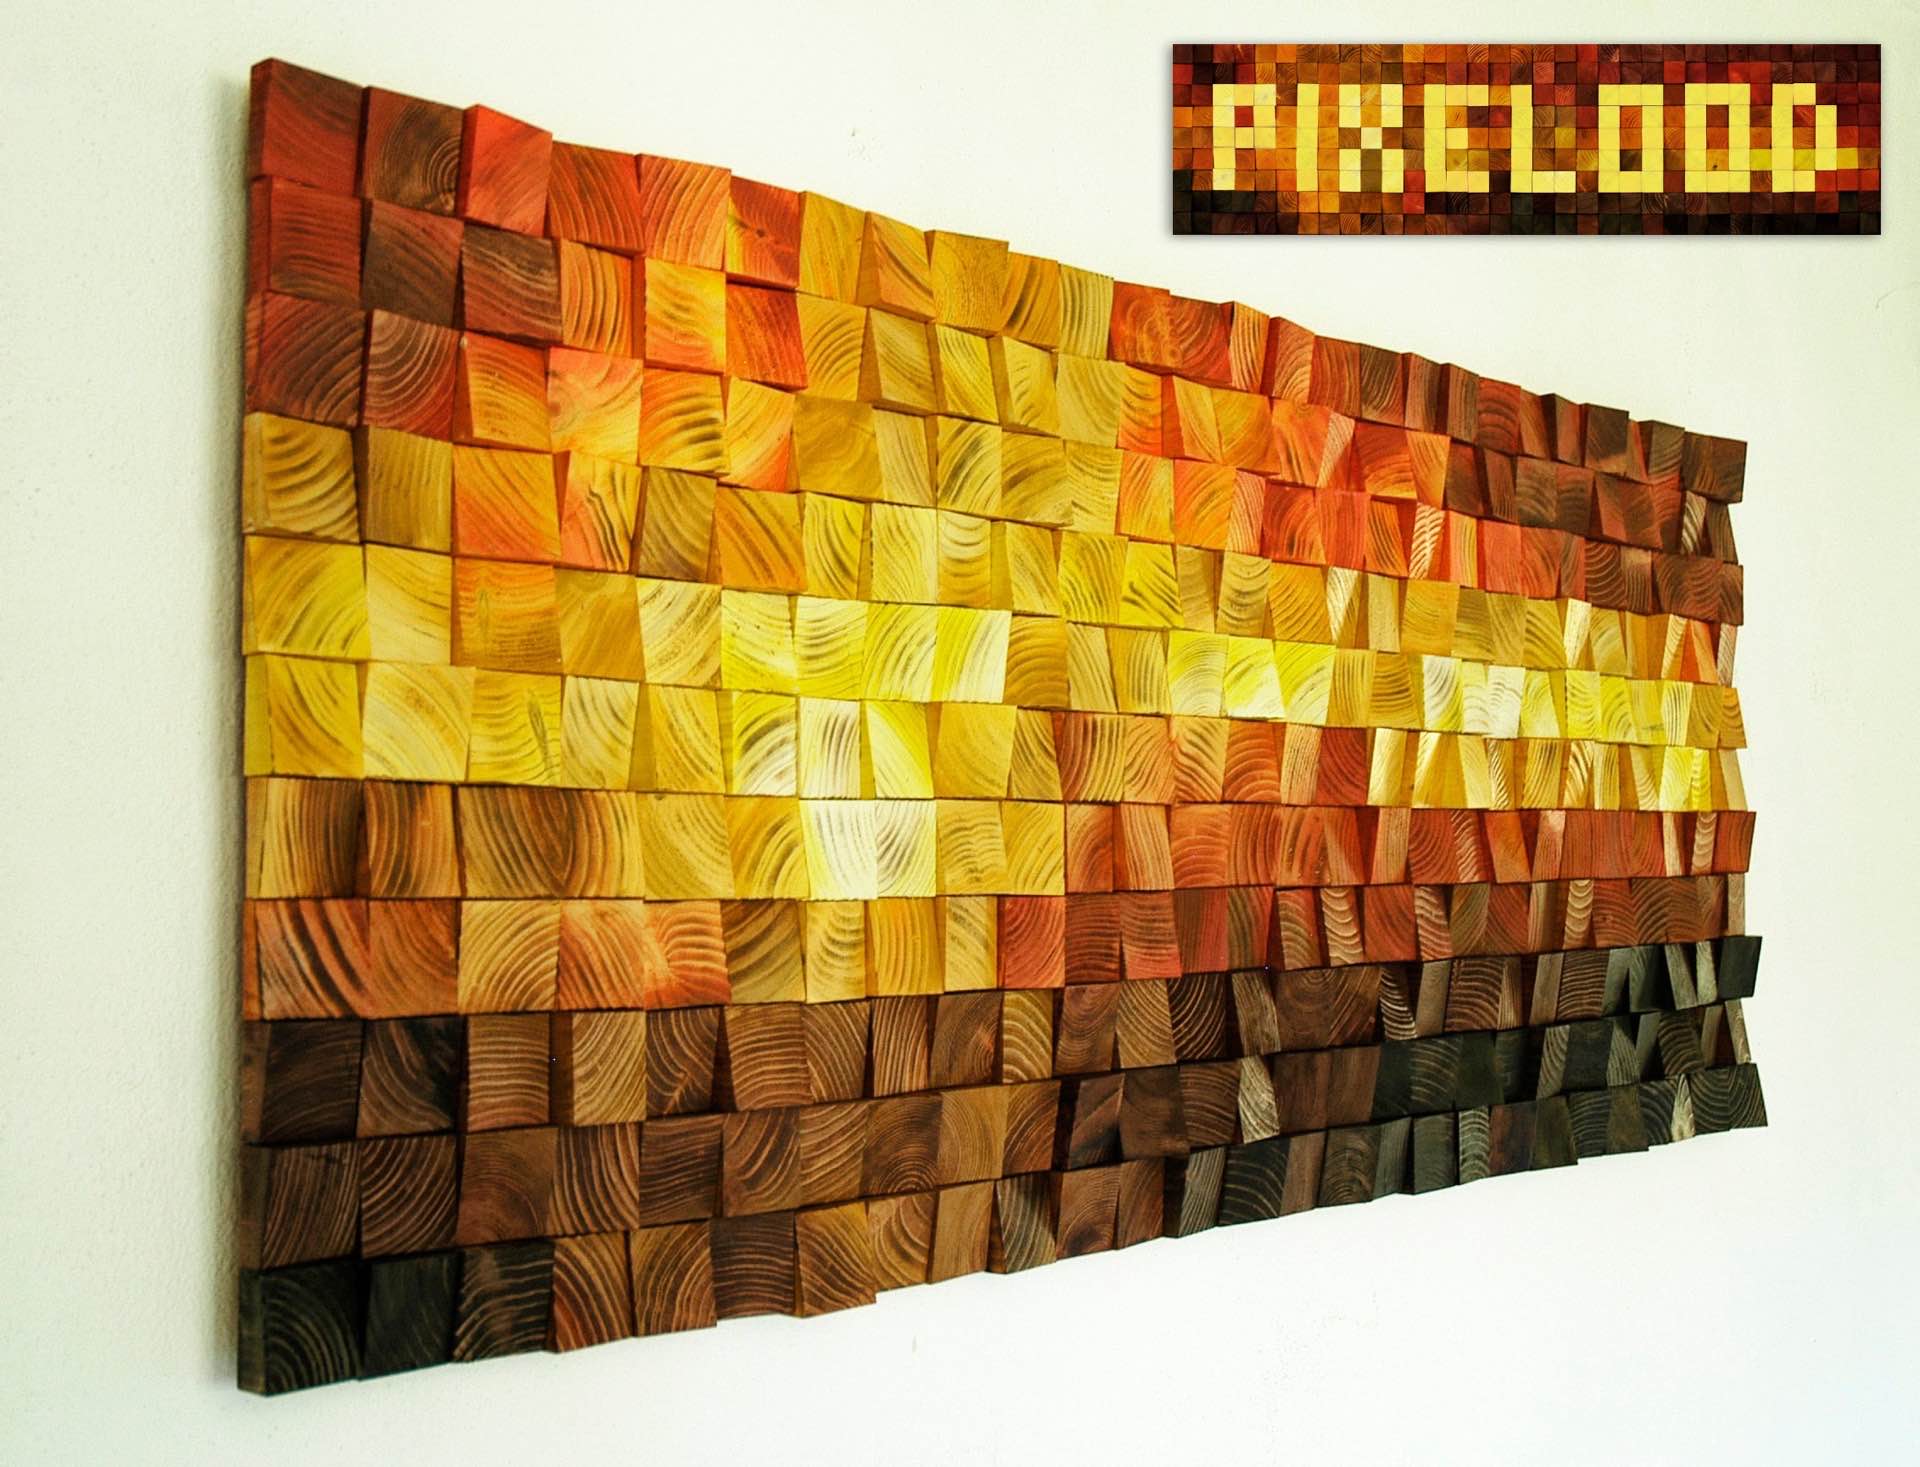 Pixelood wall art. (Prices vary)